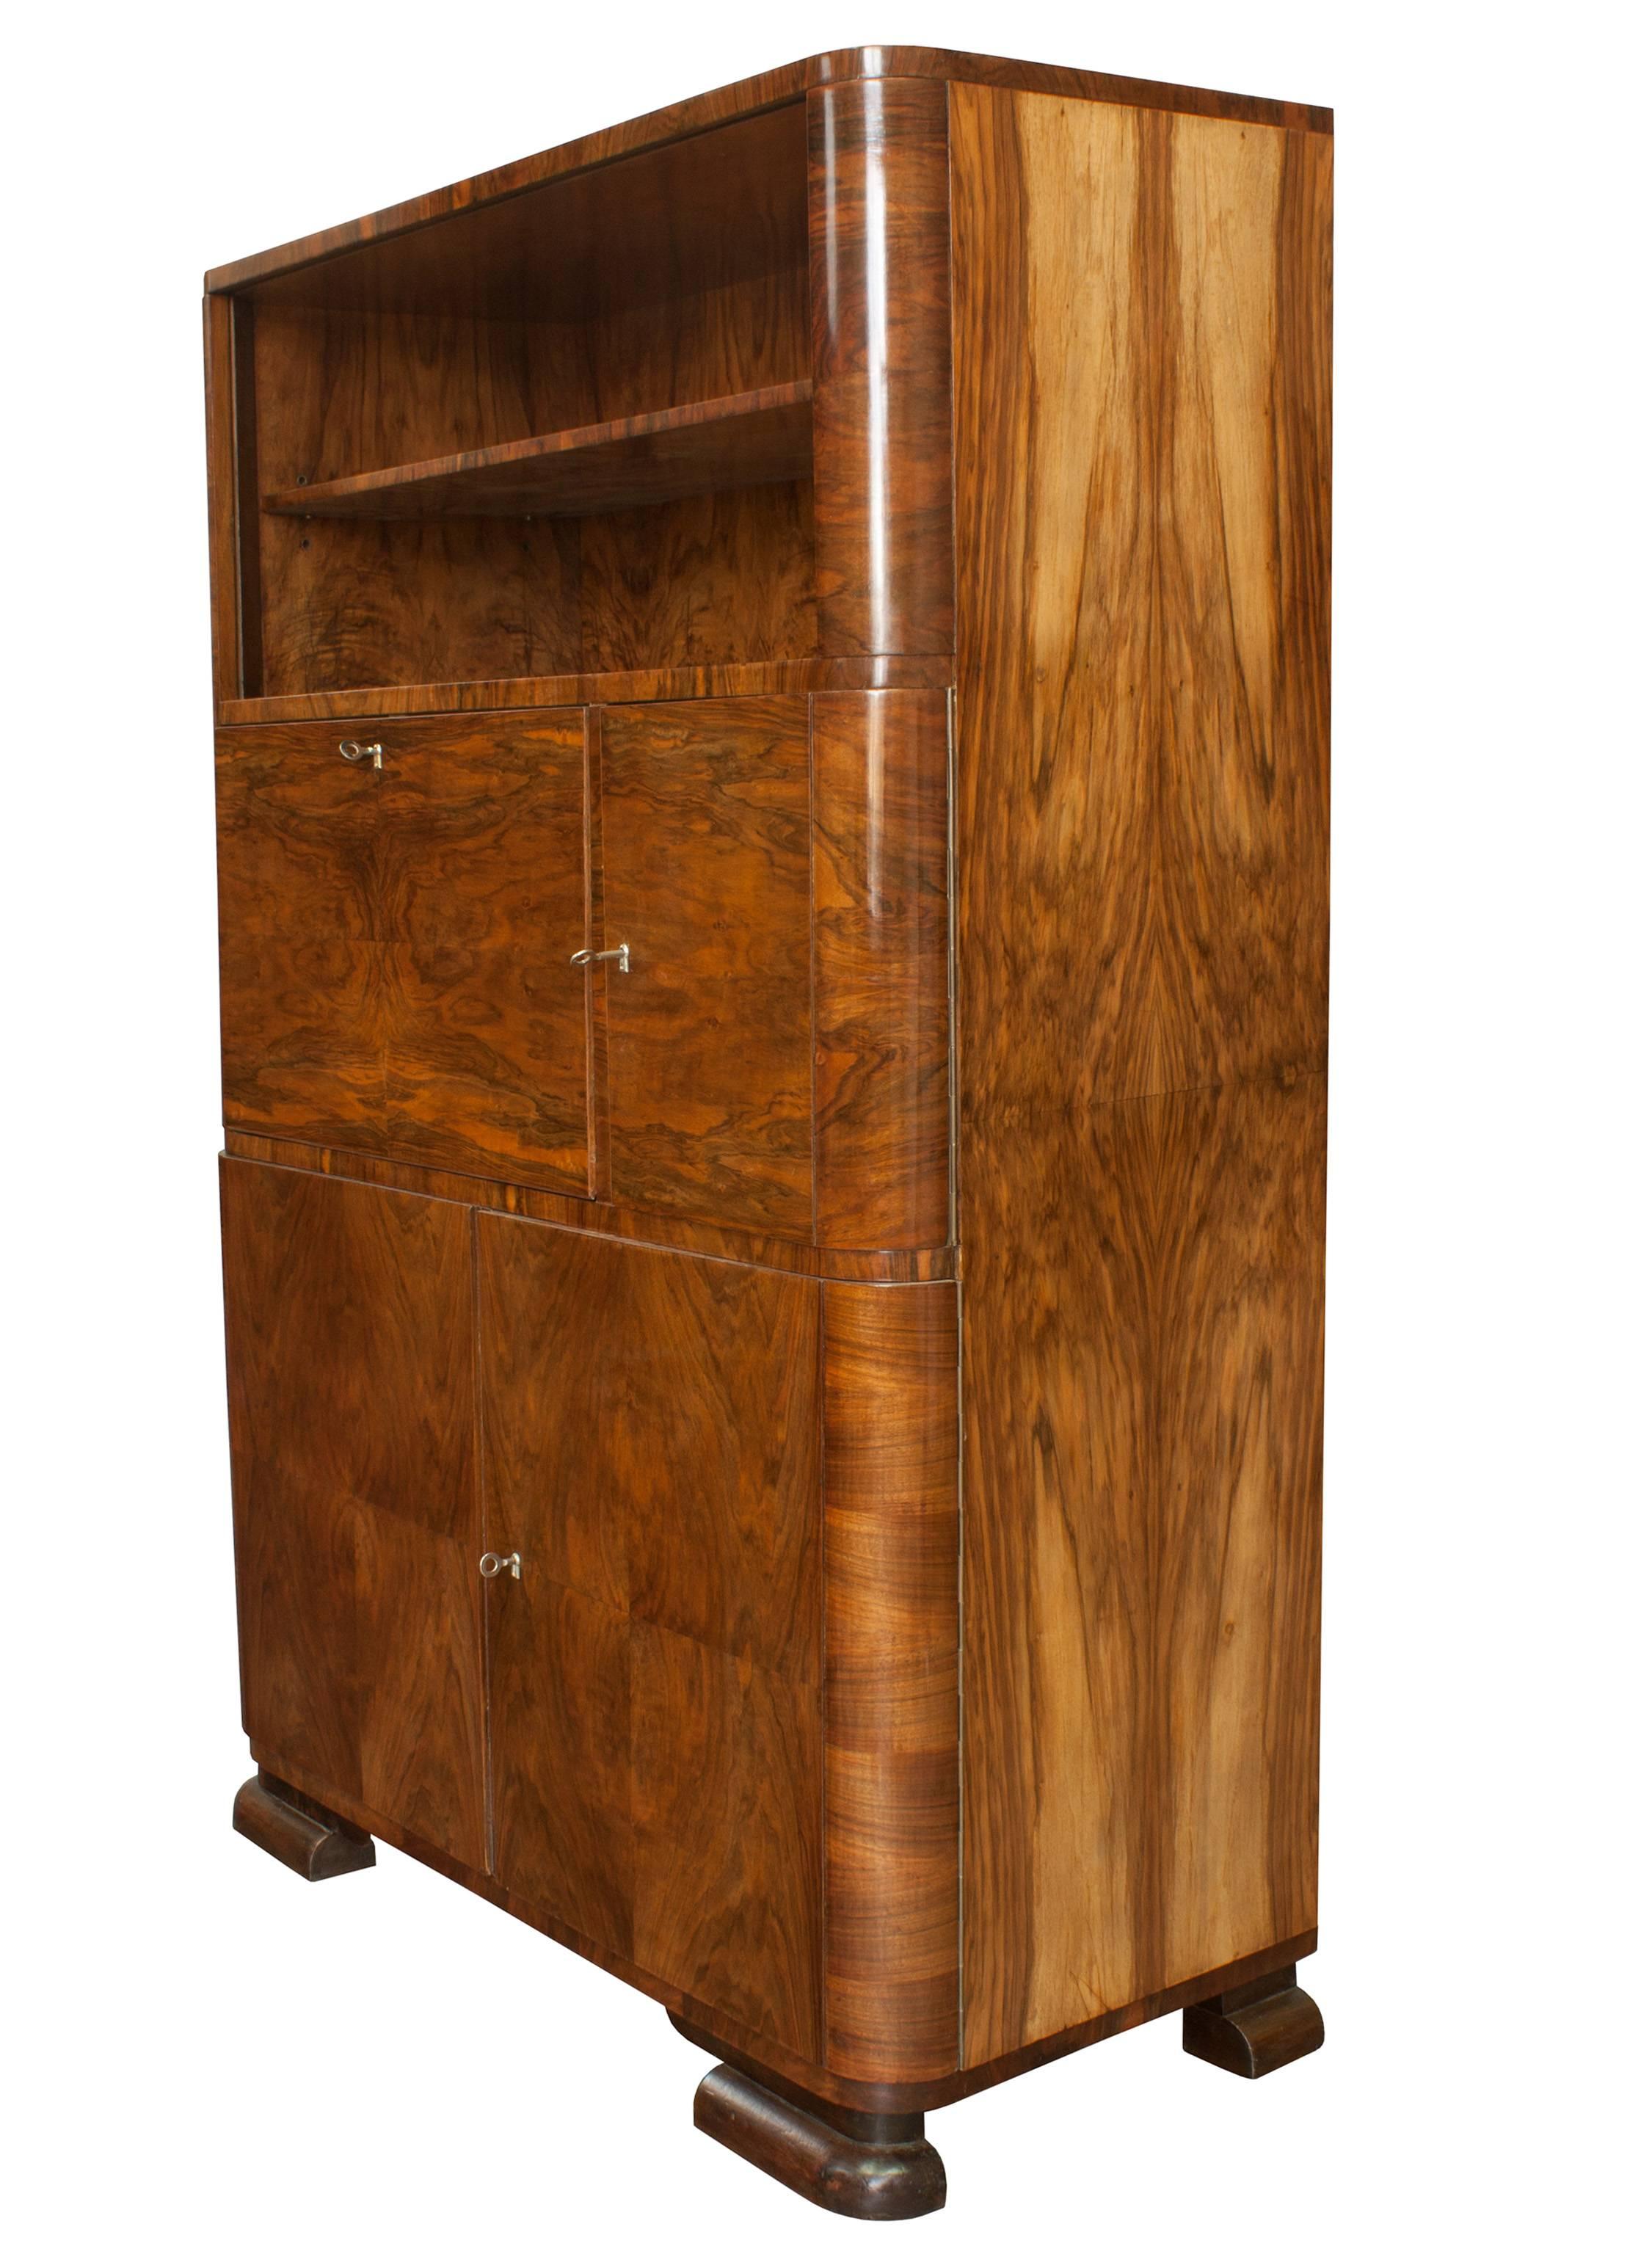 This is a very rare Art Deco cabinet designed by Jindrich Halabala and produced by UP Brno, Czechoslovakia in 1930s. Quality materials and elegant curves are typical for Halabala’s furniture. This particular piece has got a stunning rich walnut